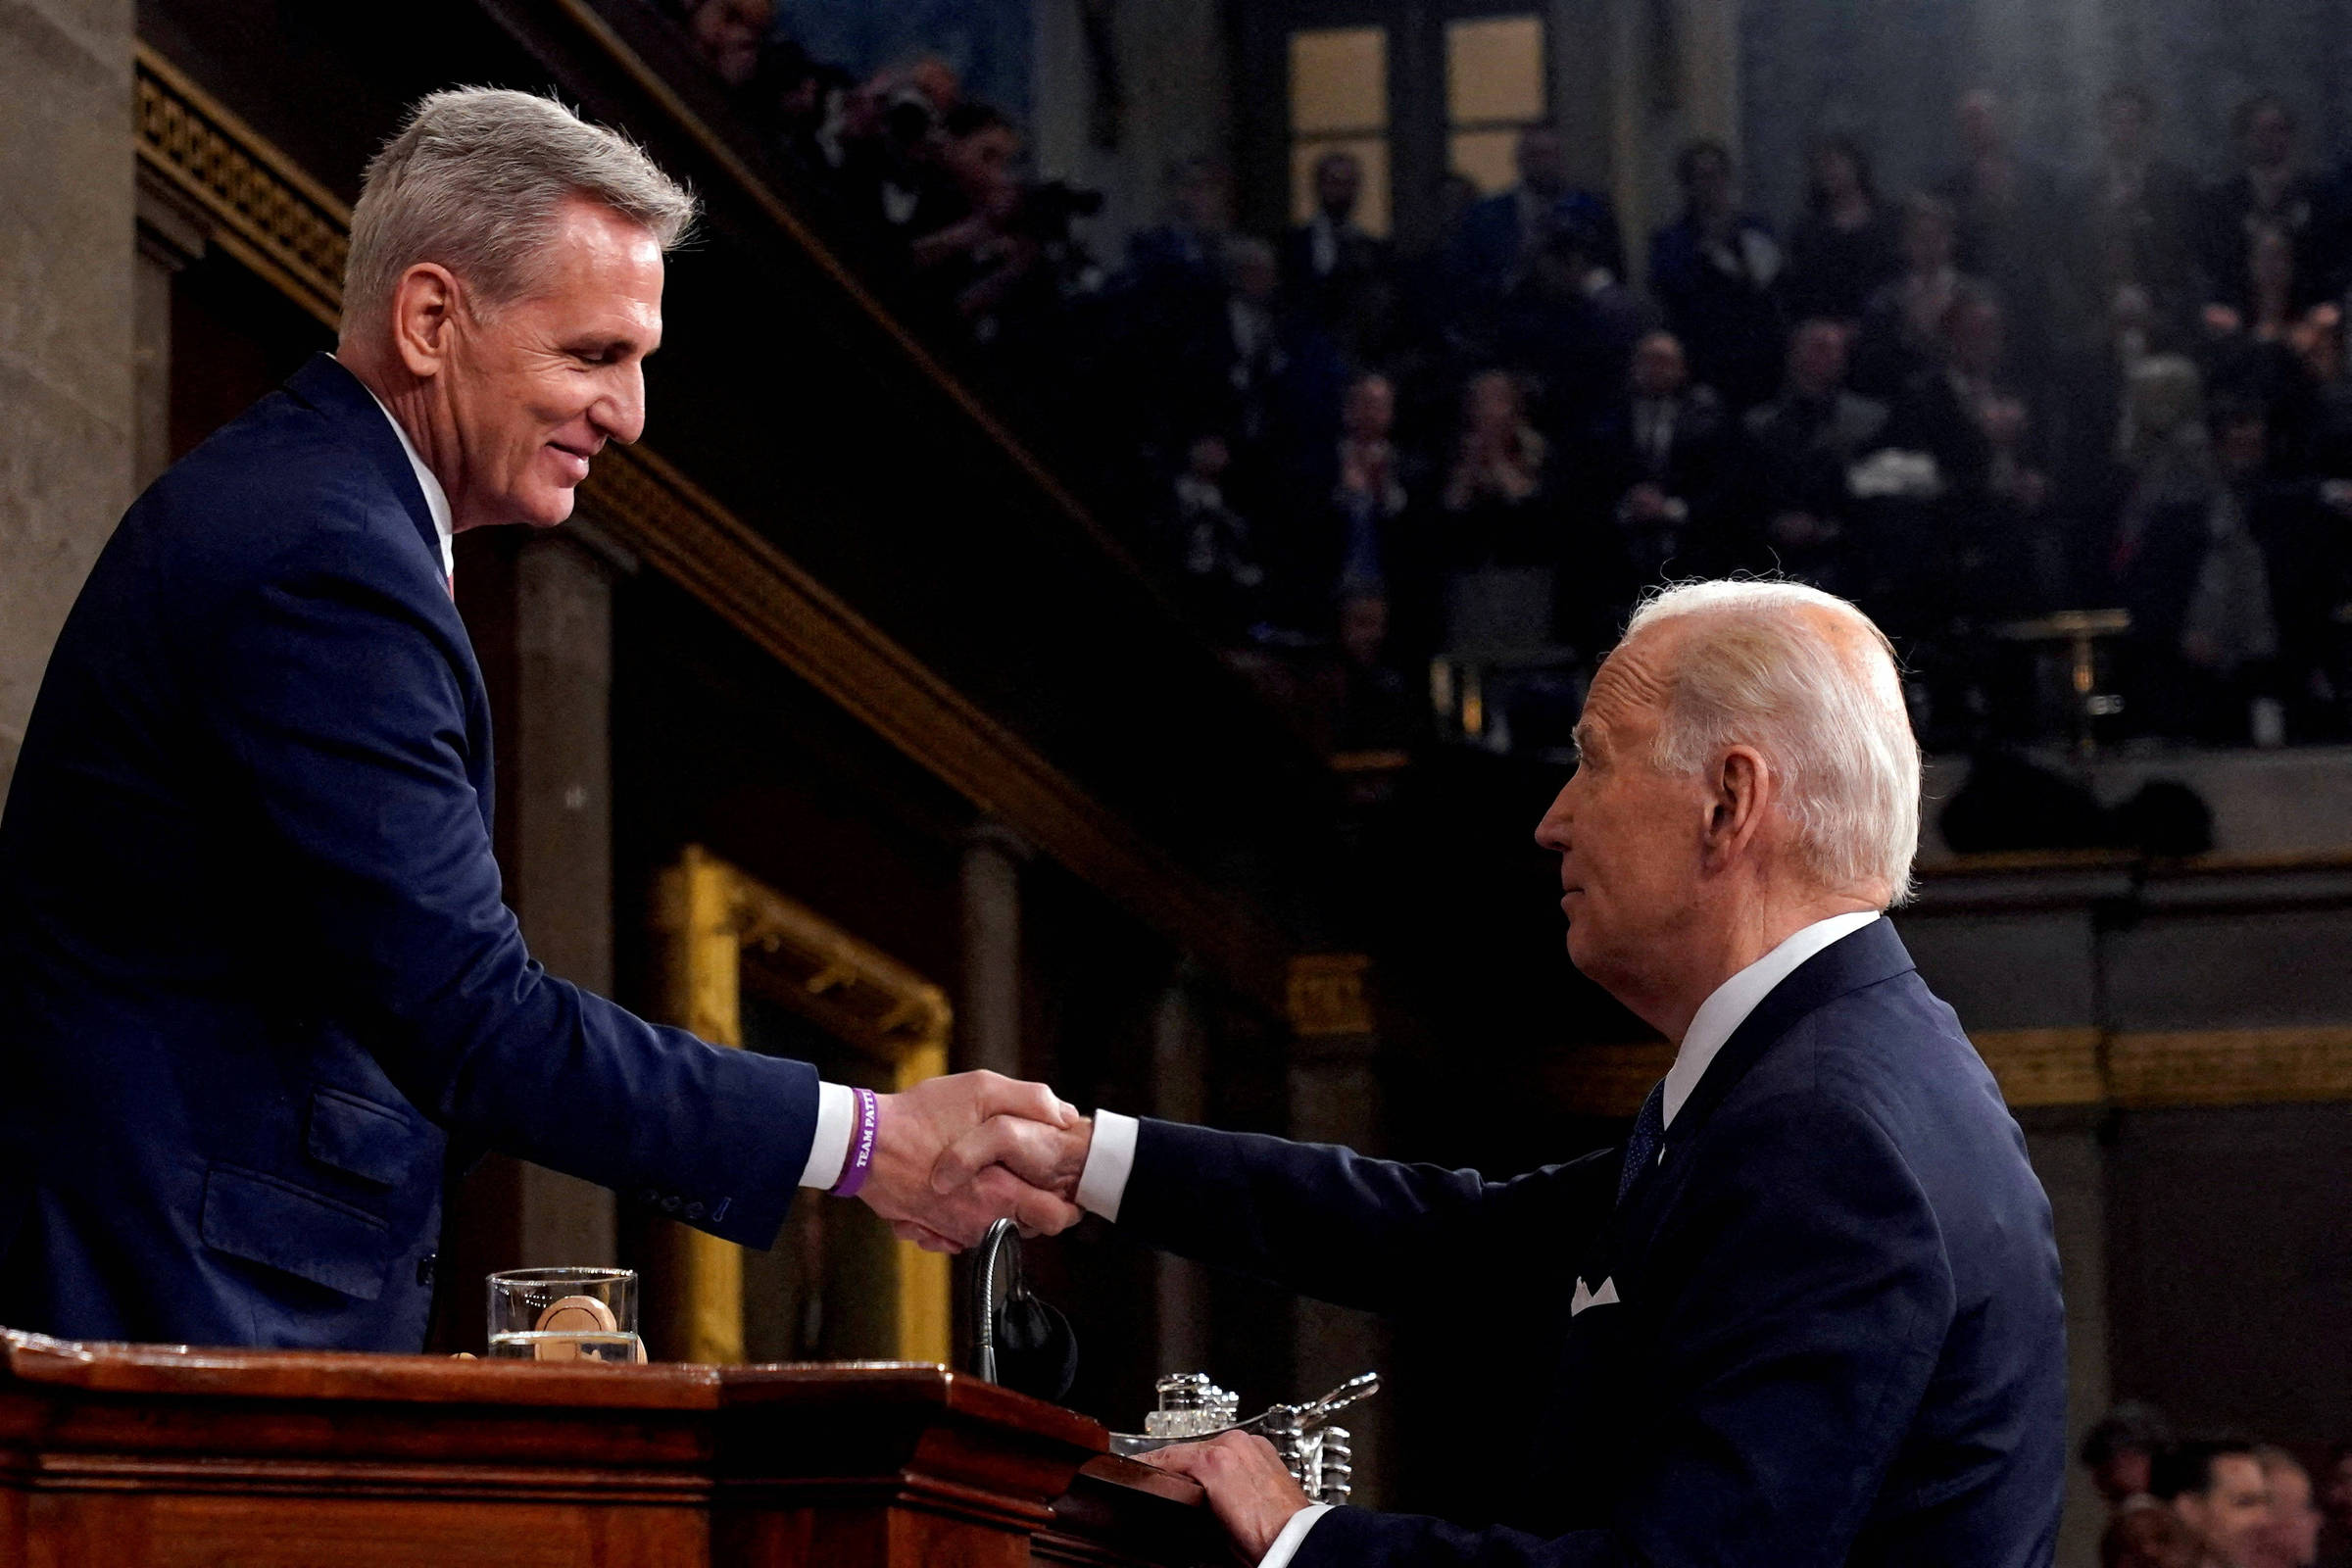 Opinion – Ross Douthat: Kevin McCarthy has quality rare in a House Speaker